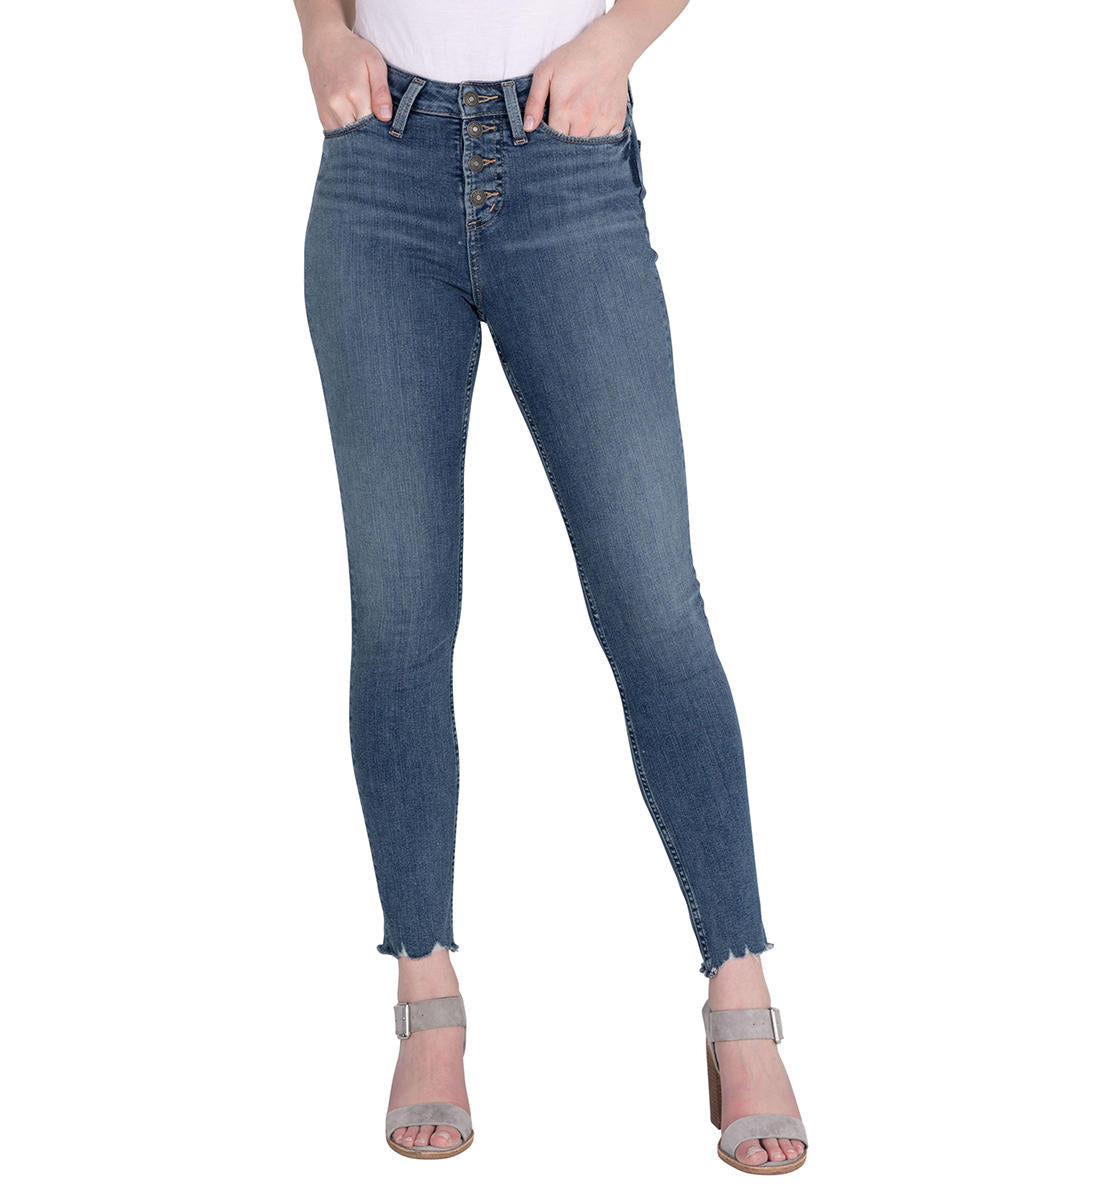 Silver High Note Skinny Jeans